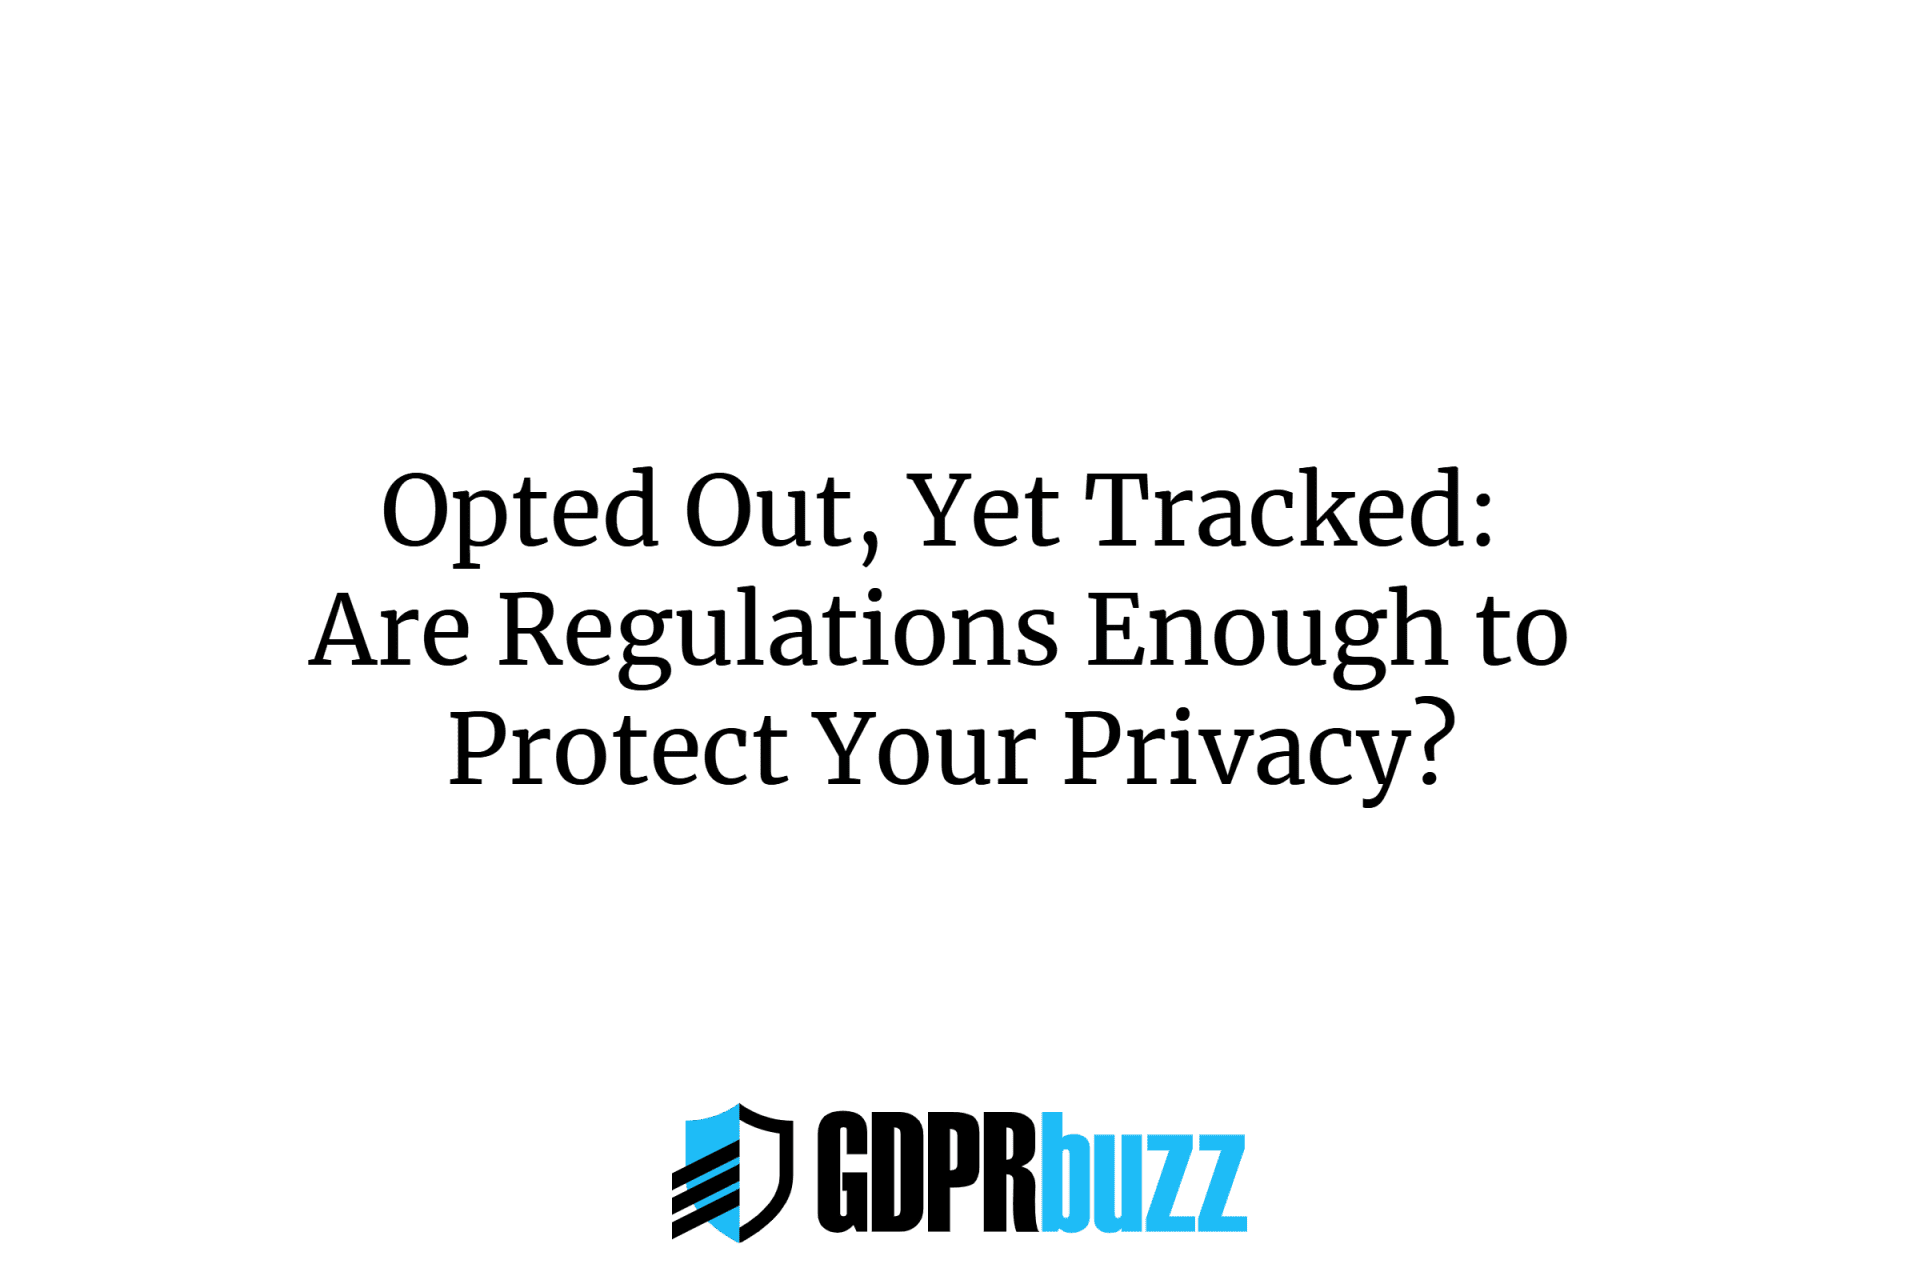 Opted out, yet tracked: are regulations enough to protect your privacy?